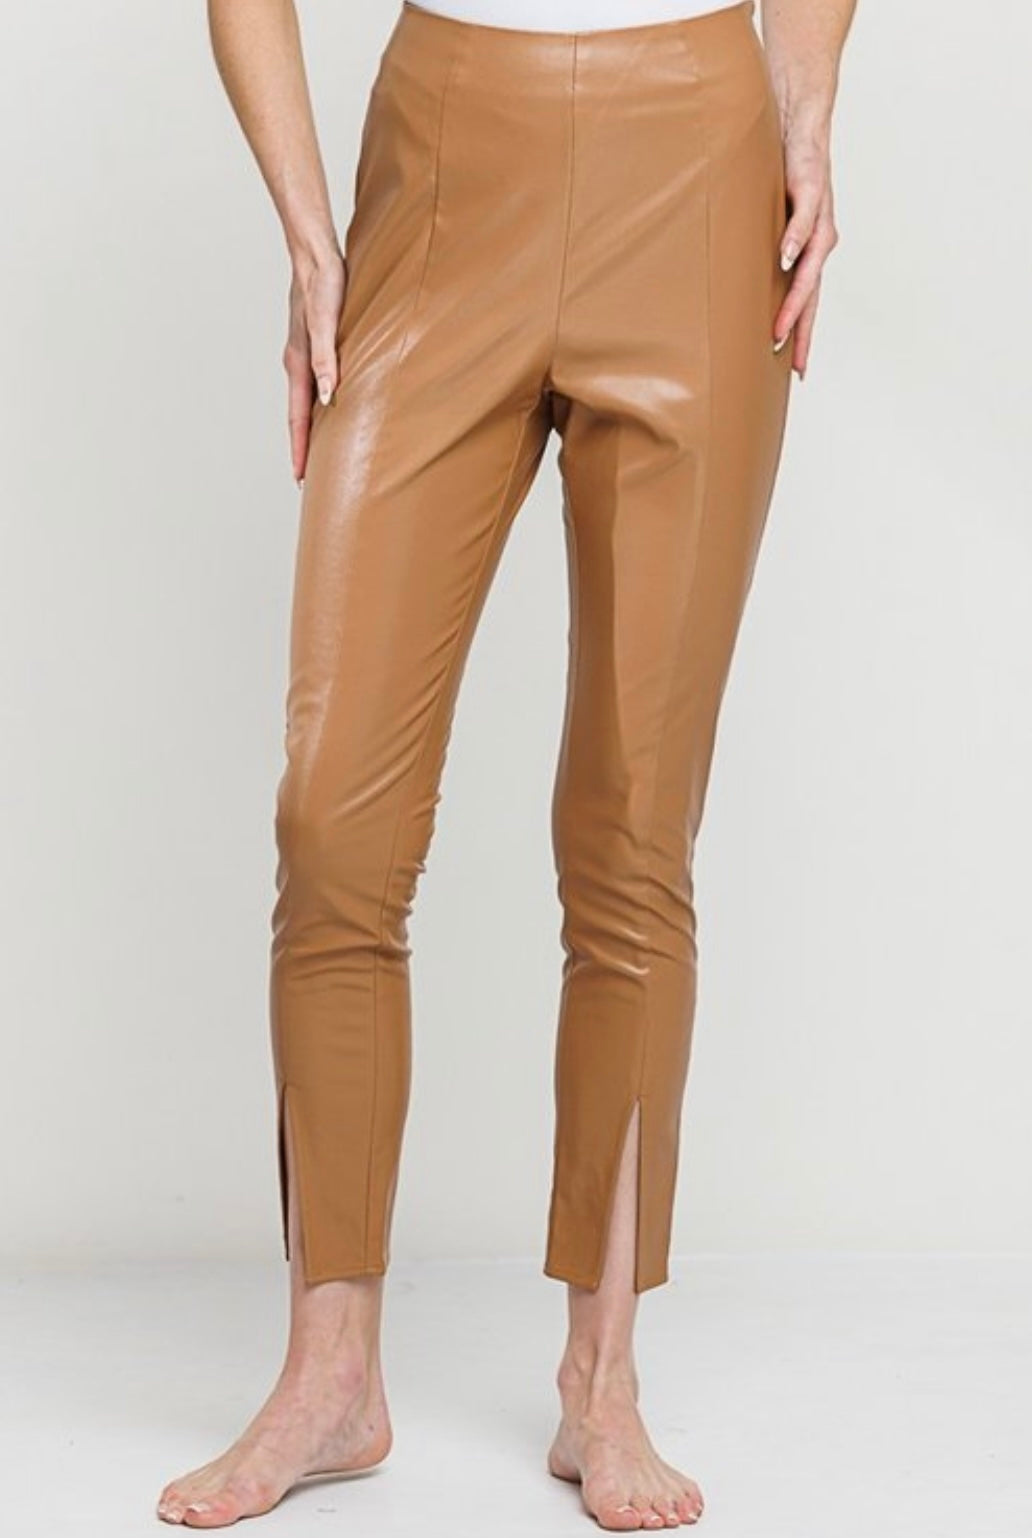 Devin Vegan Leather Leggings - Corinne Boutique Family Owned and Operated USA